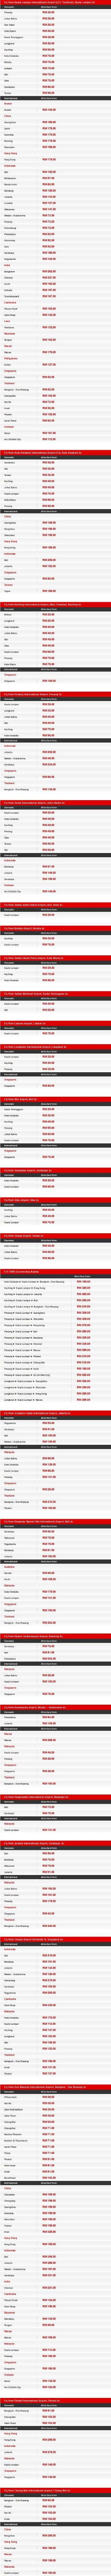 AirAsia Low Fare Affair Fly Later Fares Details